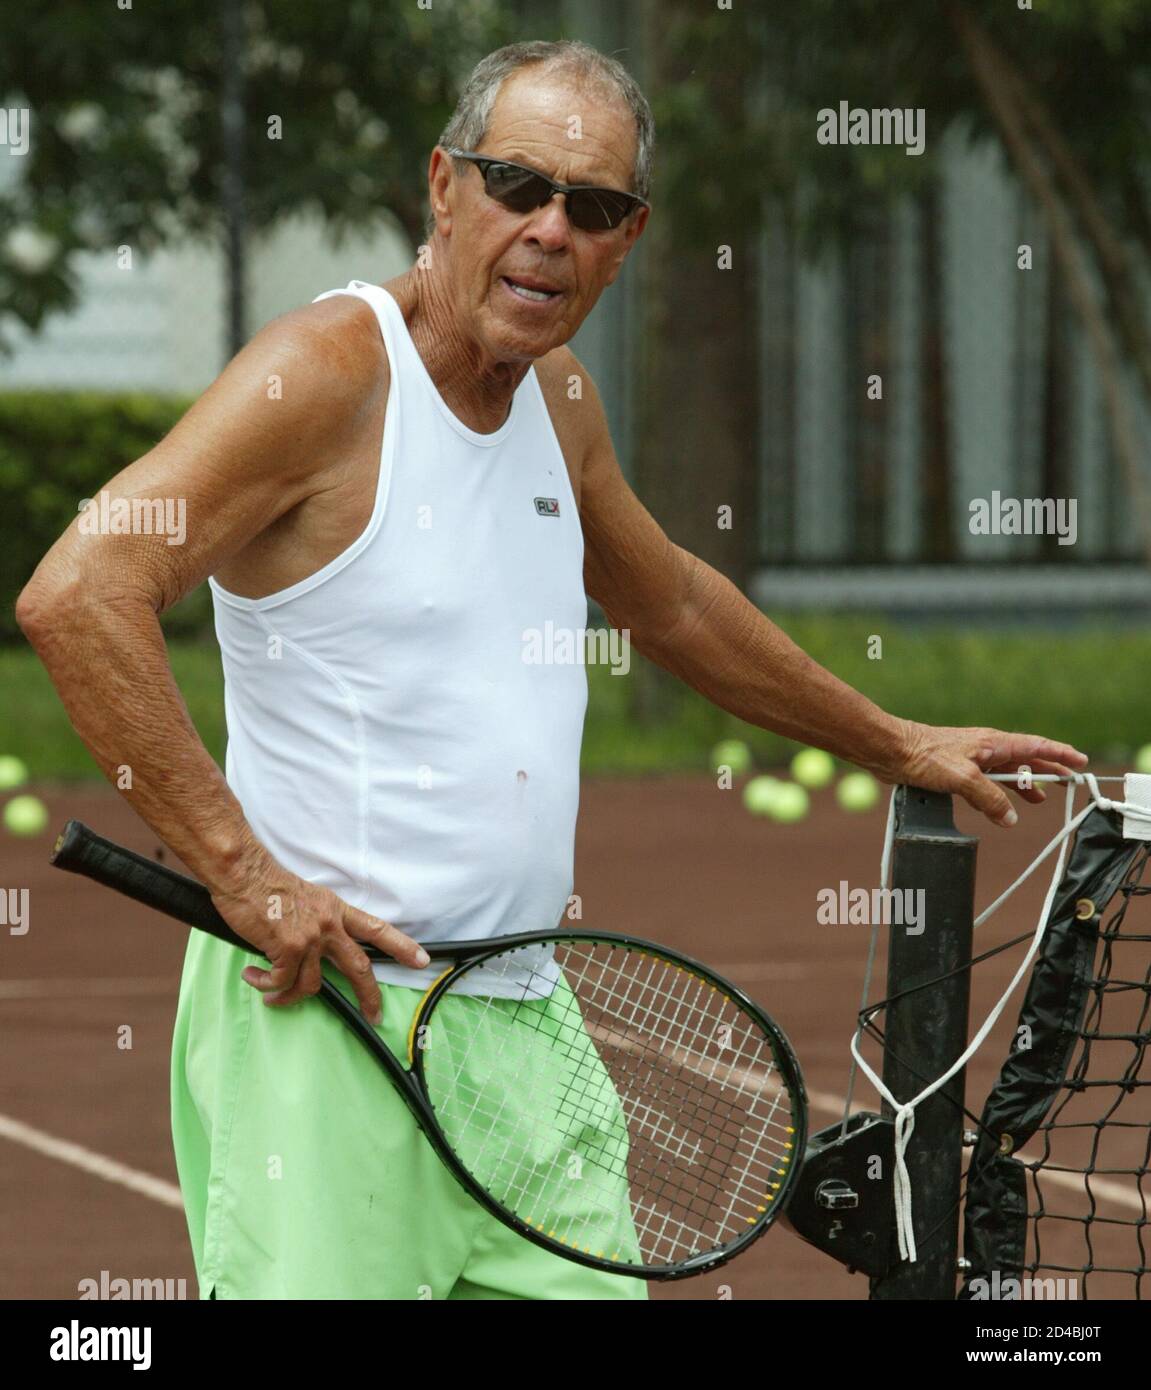 Nick Bollettieri gives instructions during practice with his students at  the Nick Bollettieri Tennis Academy in Bradenton, Florida in July 12, 2004.  Bollettieri Academy as trained past champions Andre Agassi, Monica Seles,